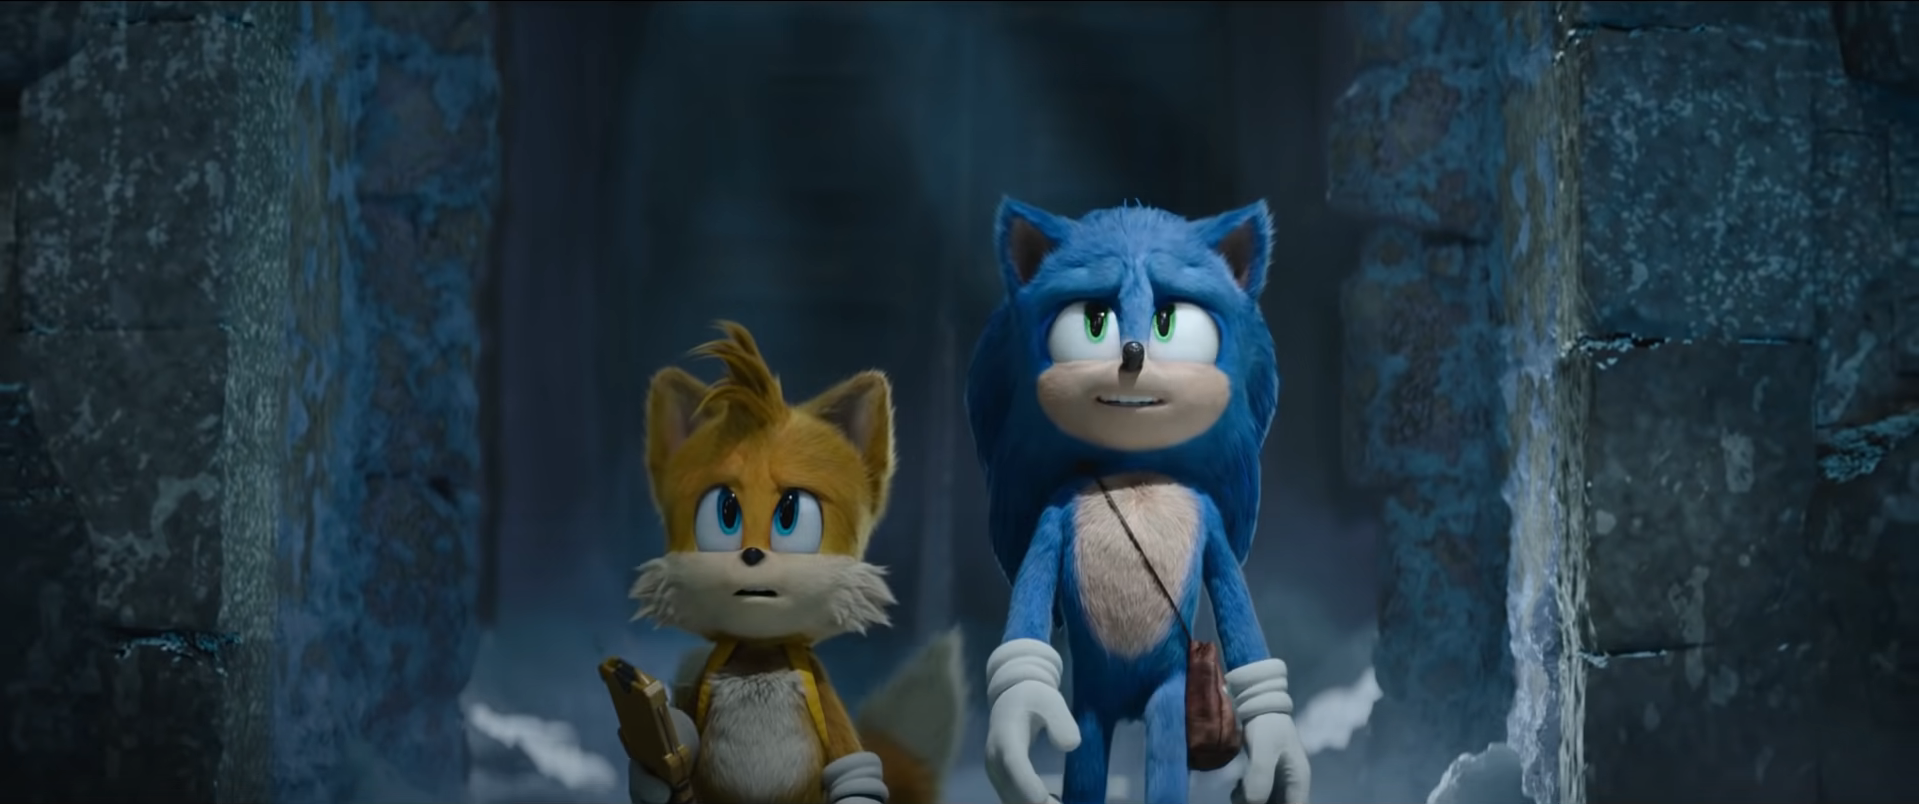 "Sonic 2" got off to the best start among video game adaptations